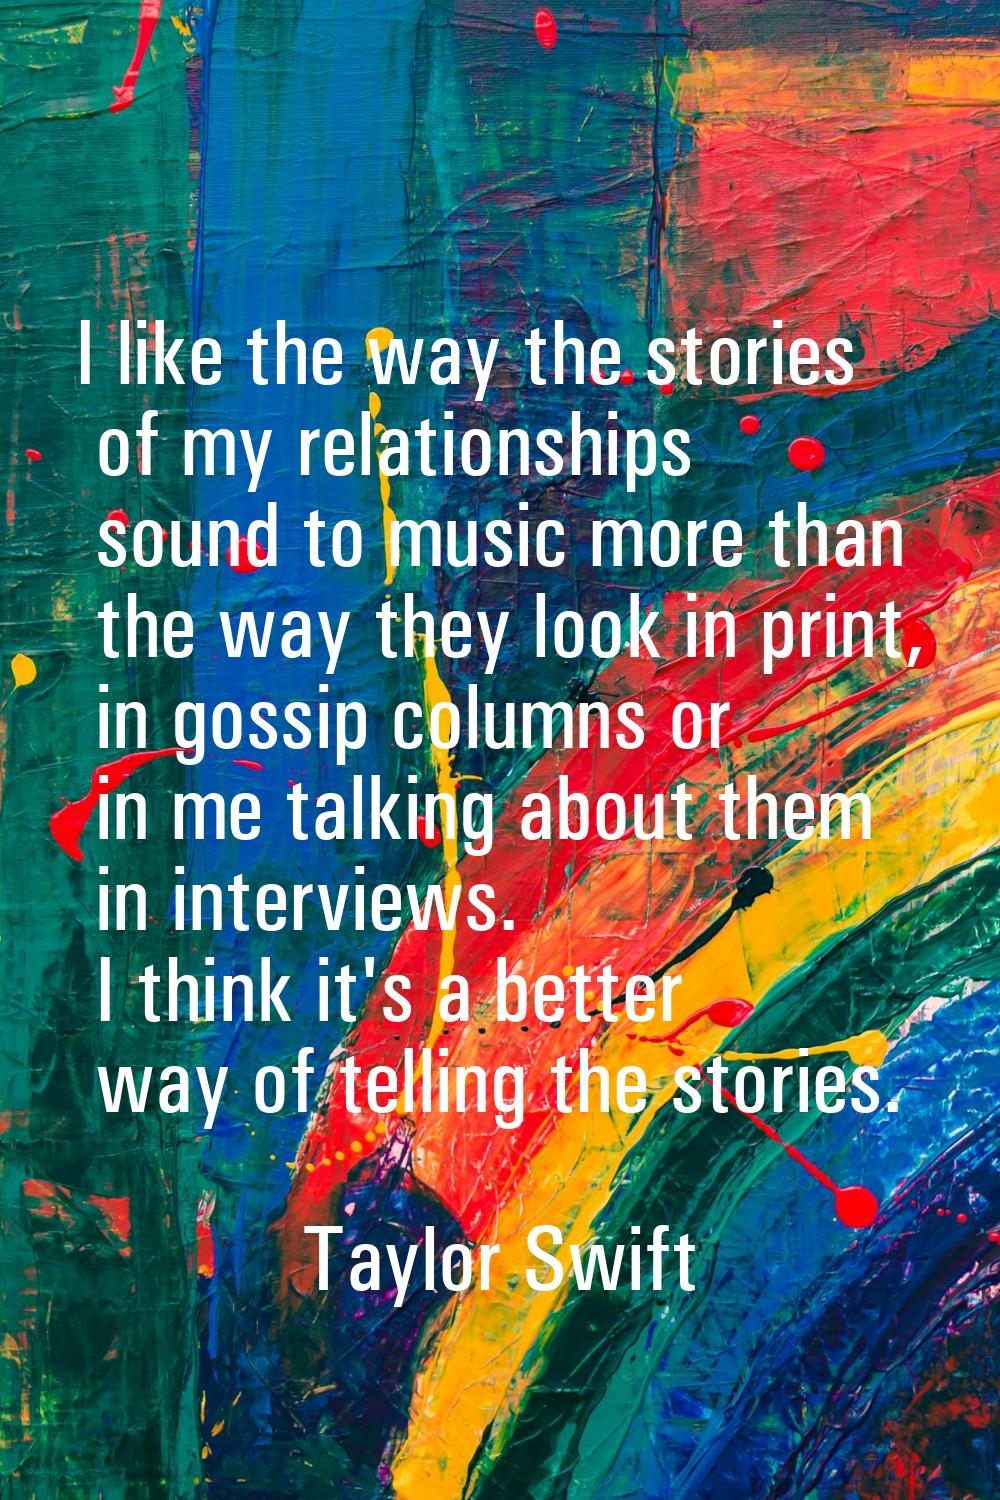 I like the way the stories of my relationships sound to music more than the way they look in print,